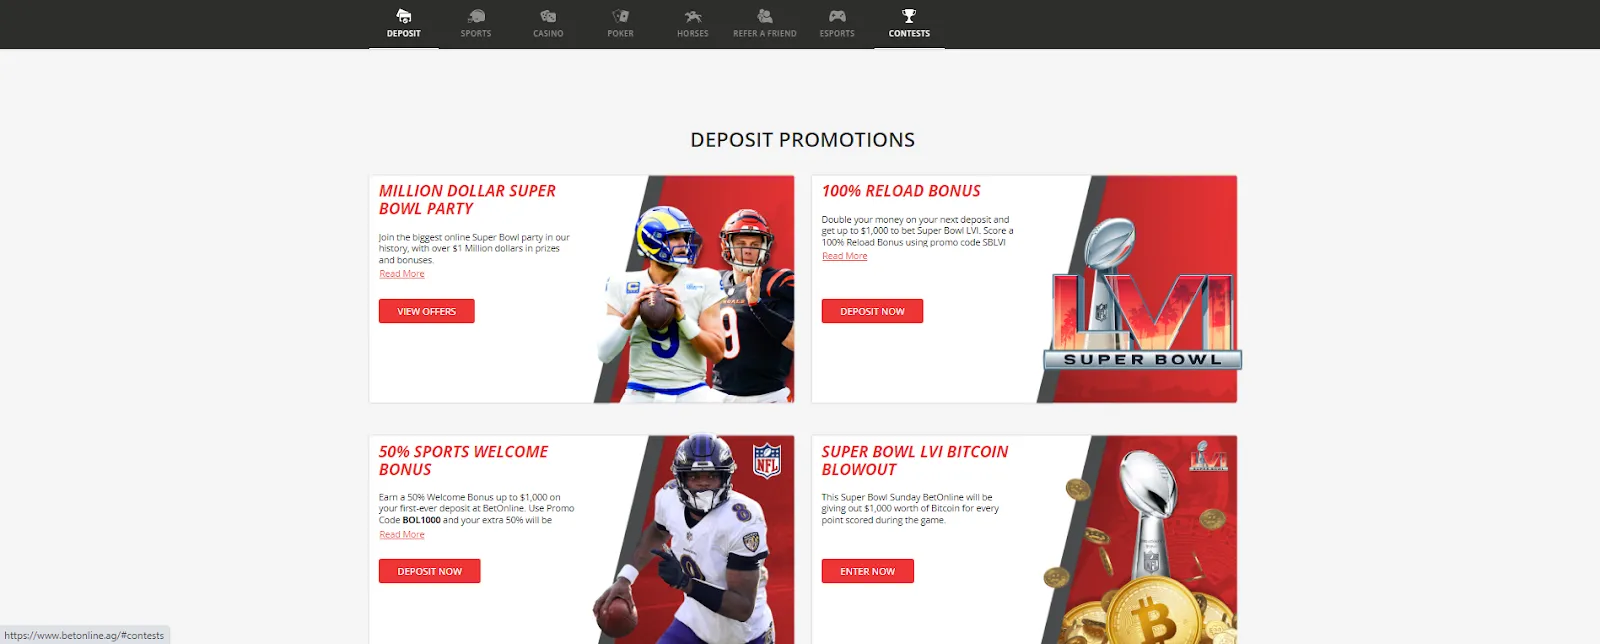 Selection of promotions on BetOnline.